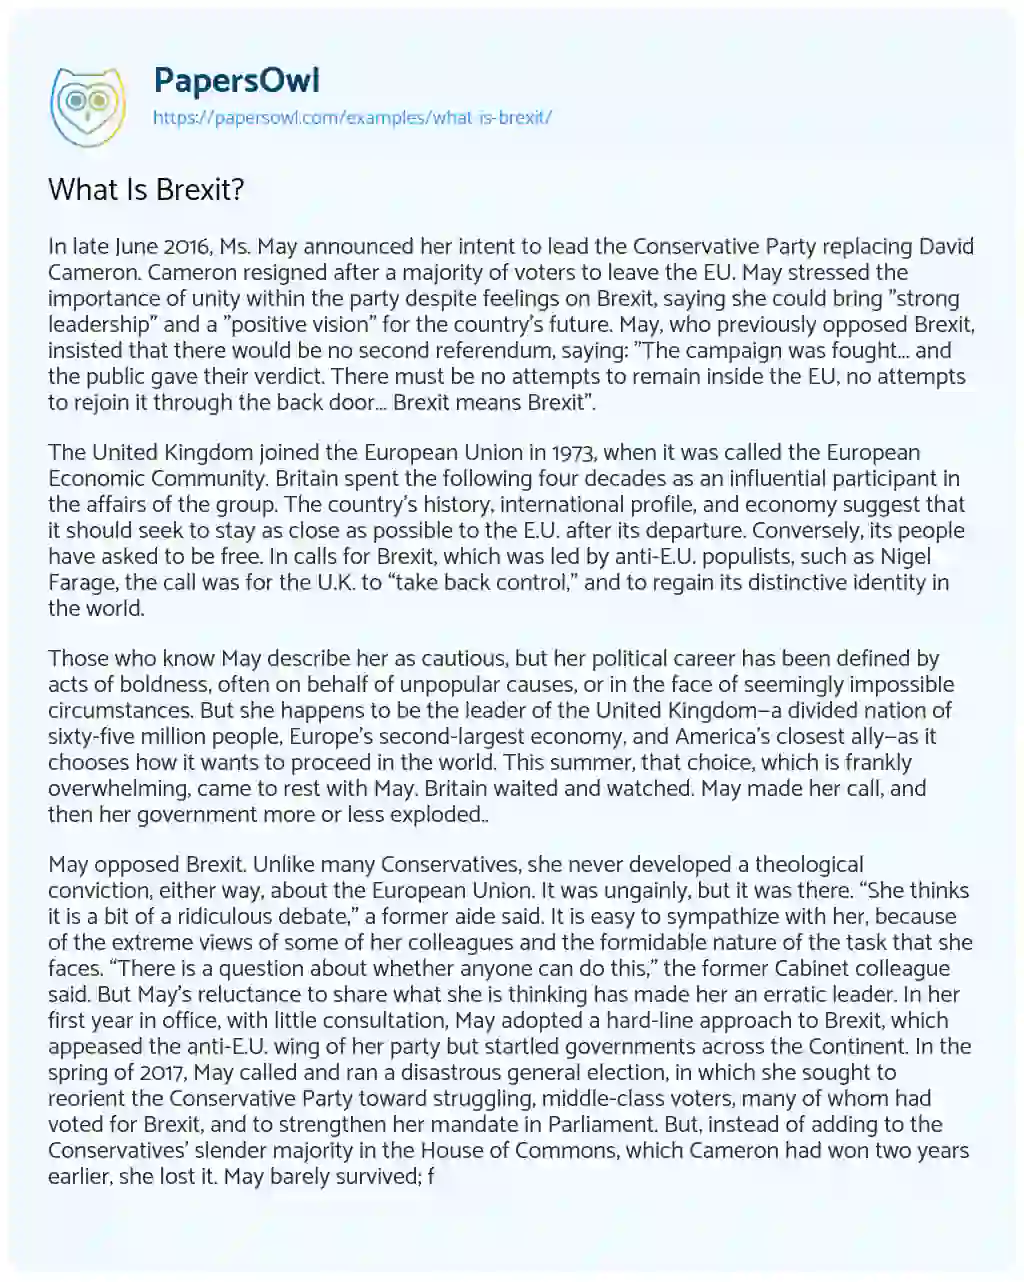 What is Brexit? essay